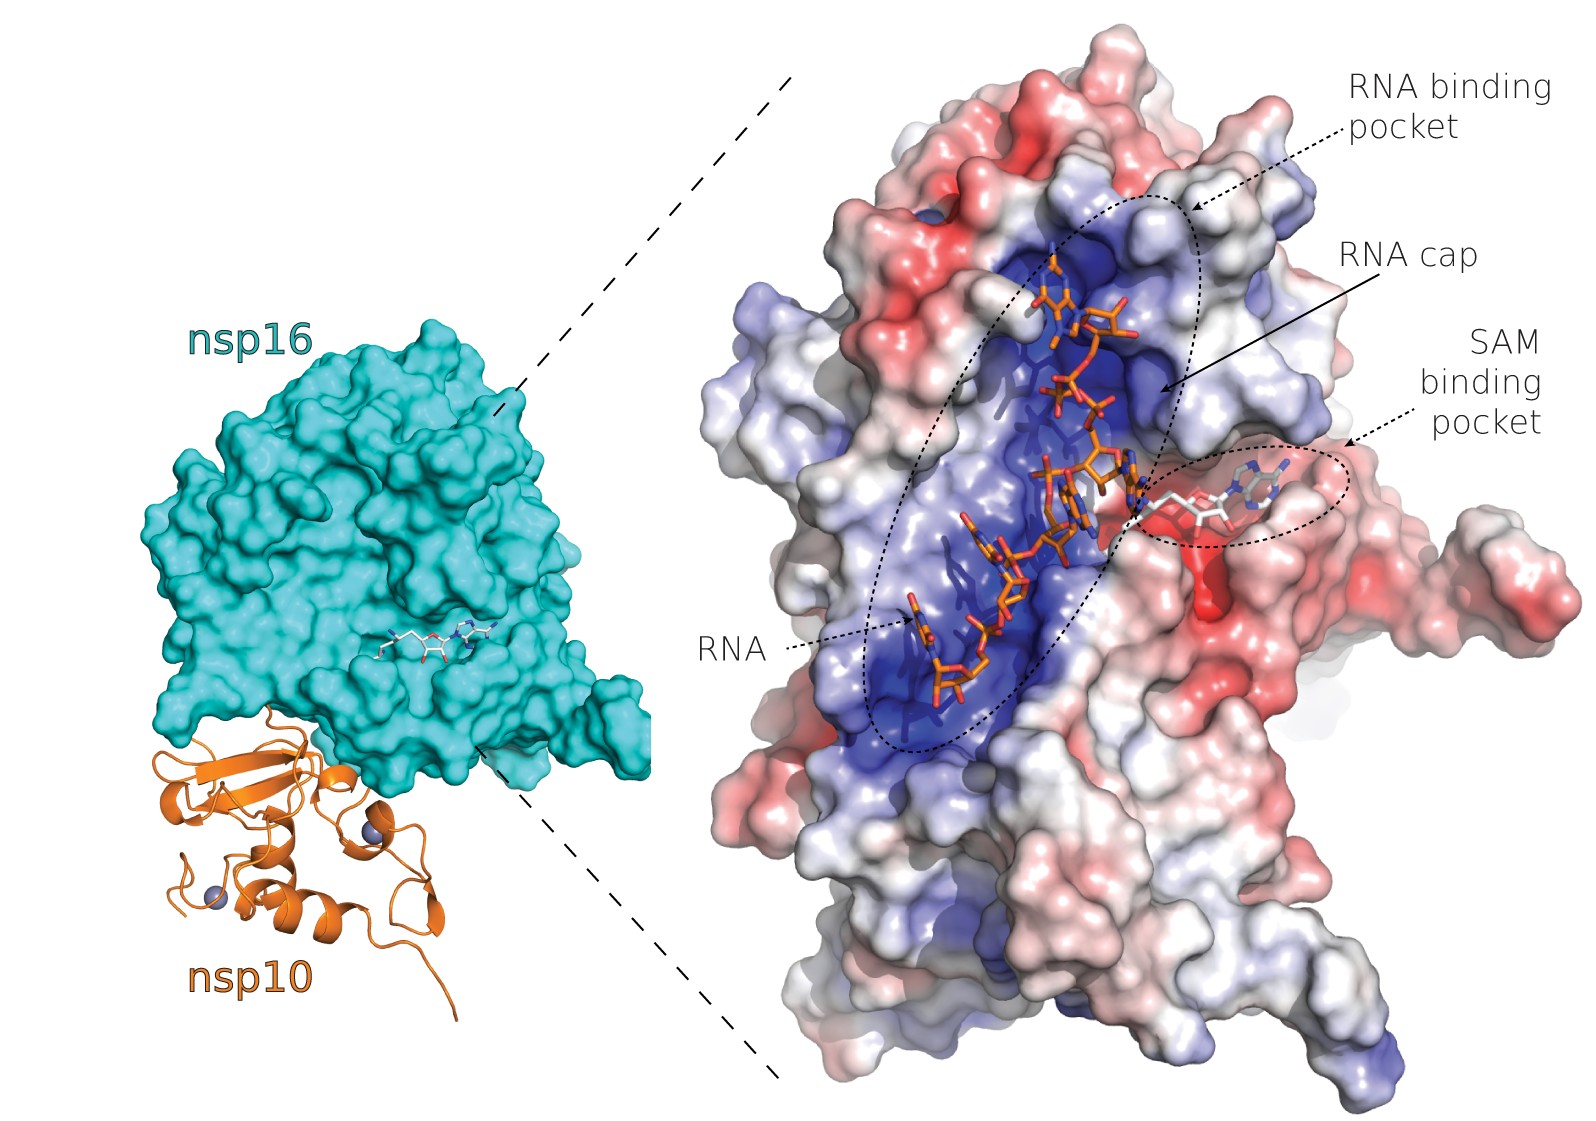 Researchers describe structure of novel coronavirus proteins suitable for design of new drugs